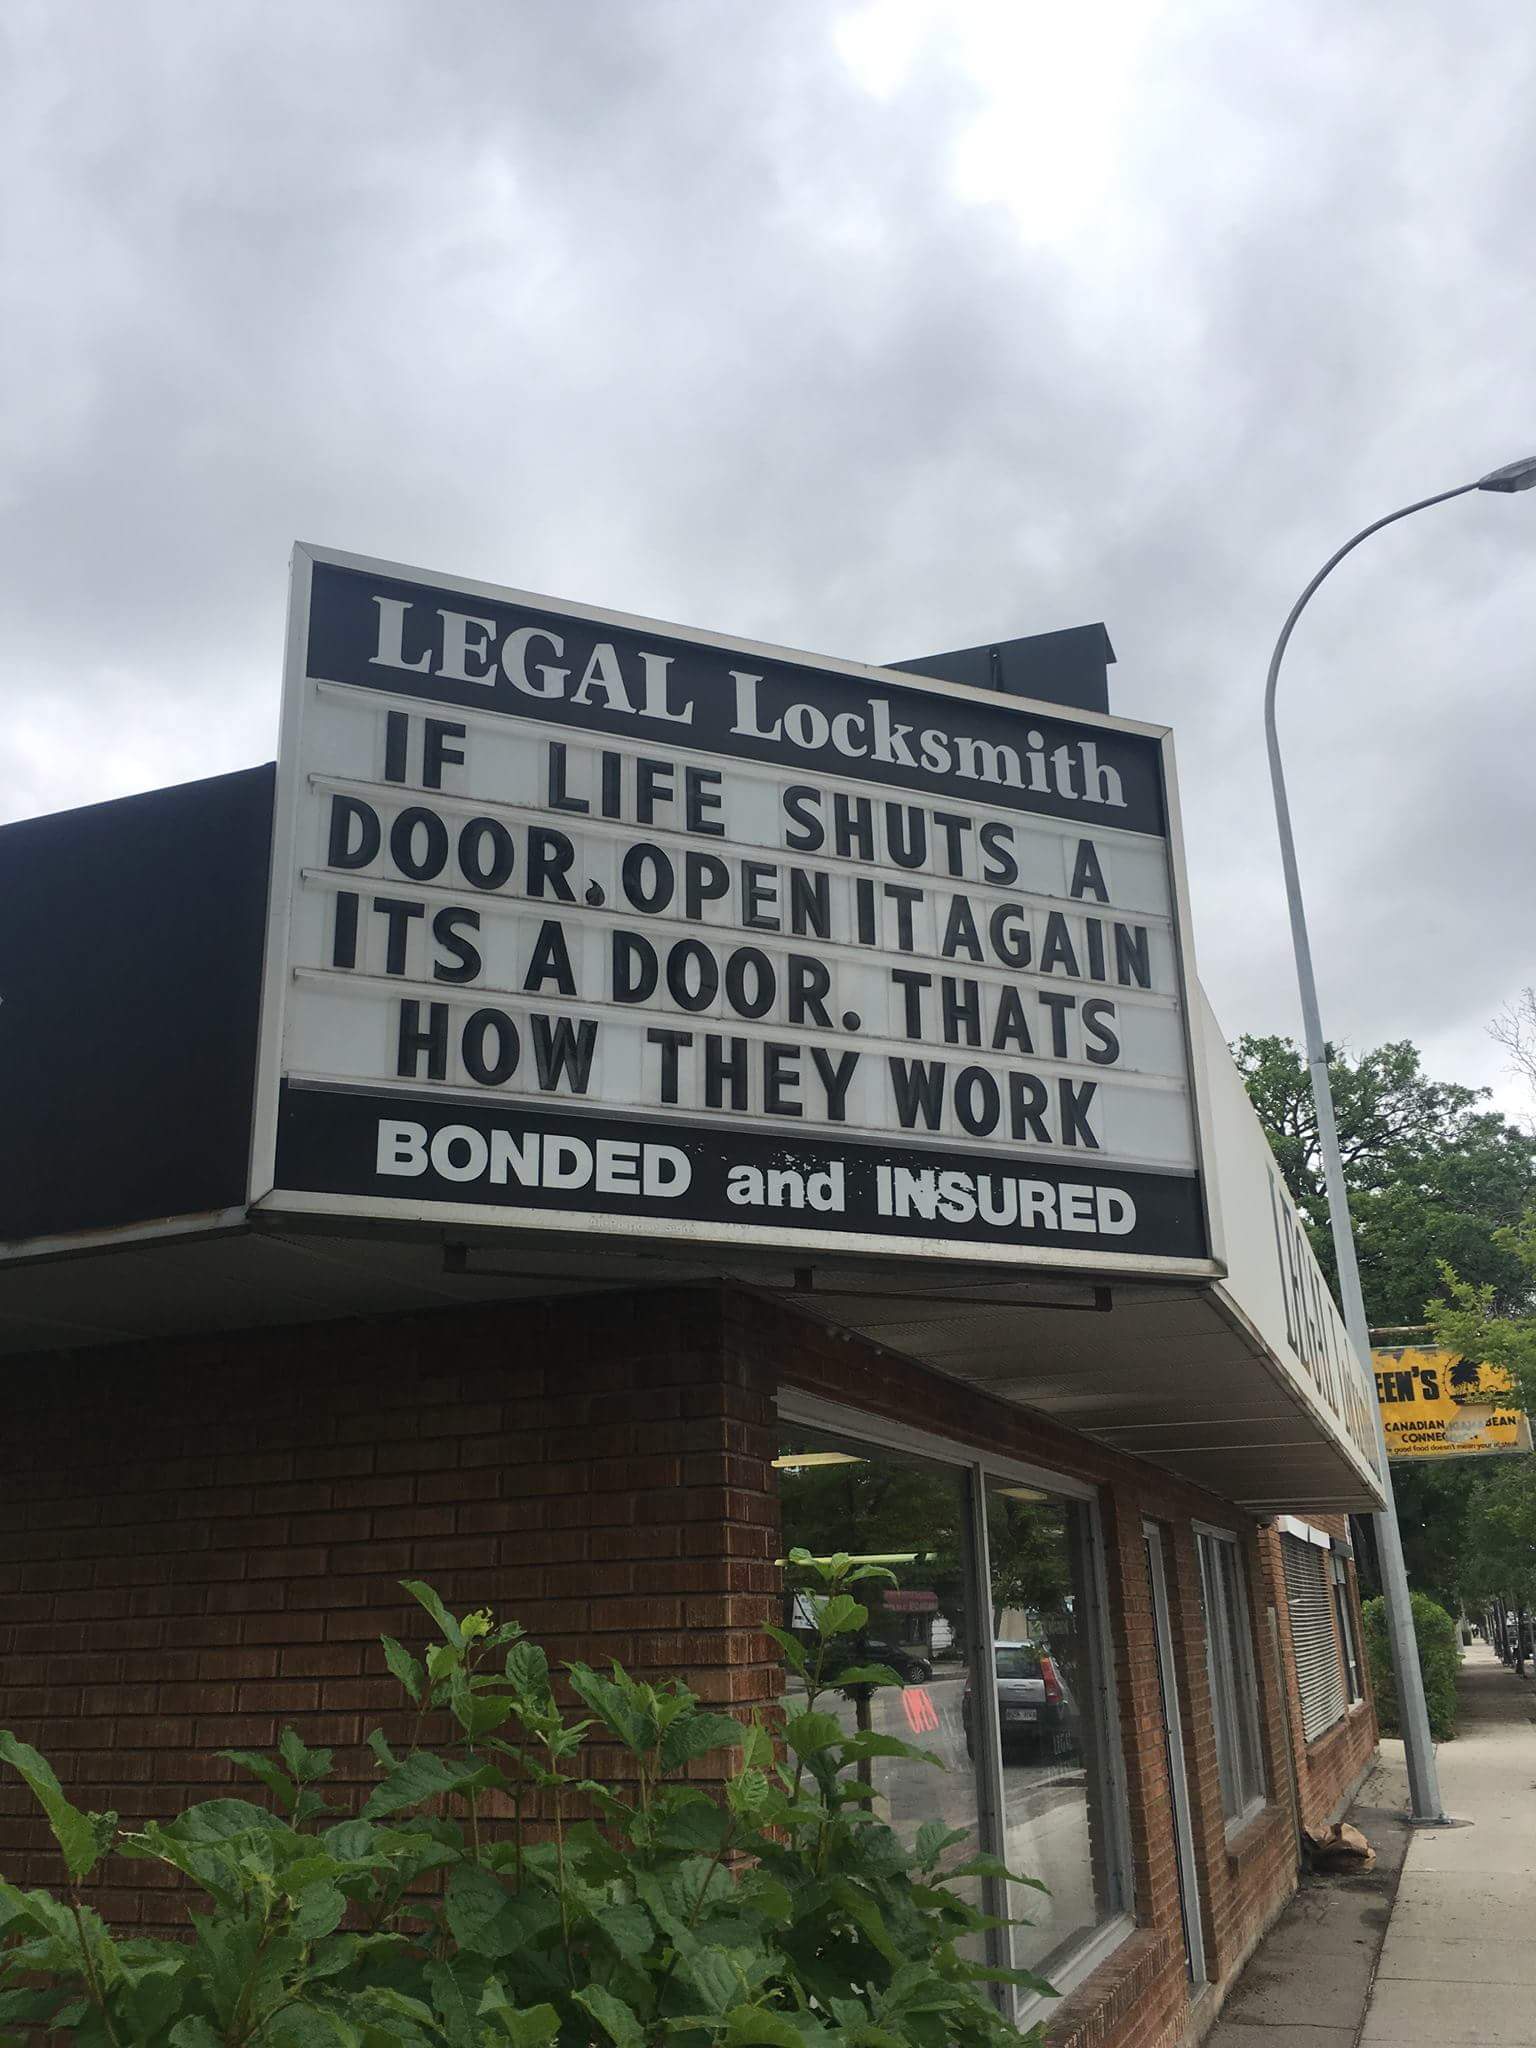 street sign - Legal Locksmith If Life Shuts A Door. Open It Again Its A Door. Thats How They Work Bonded and Insured Canadian Connec goodfood